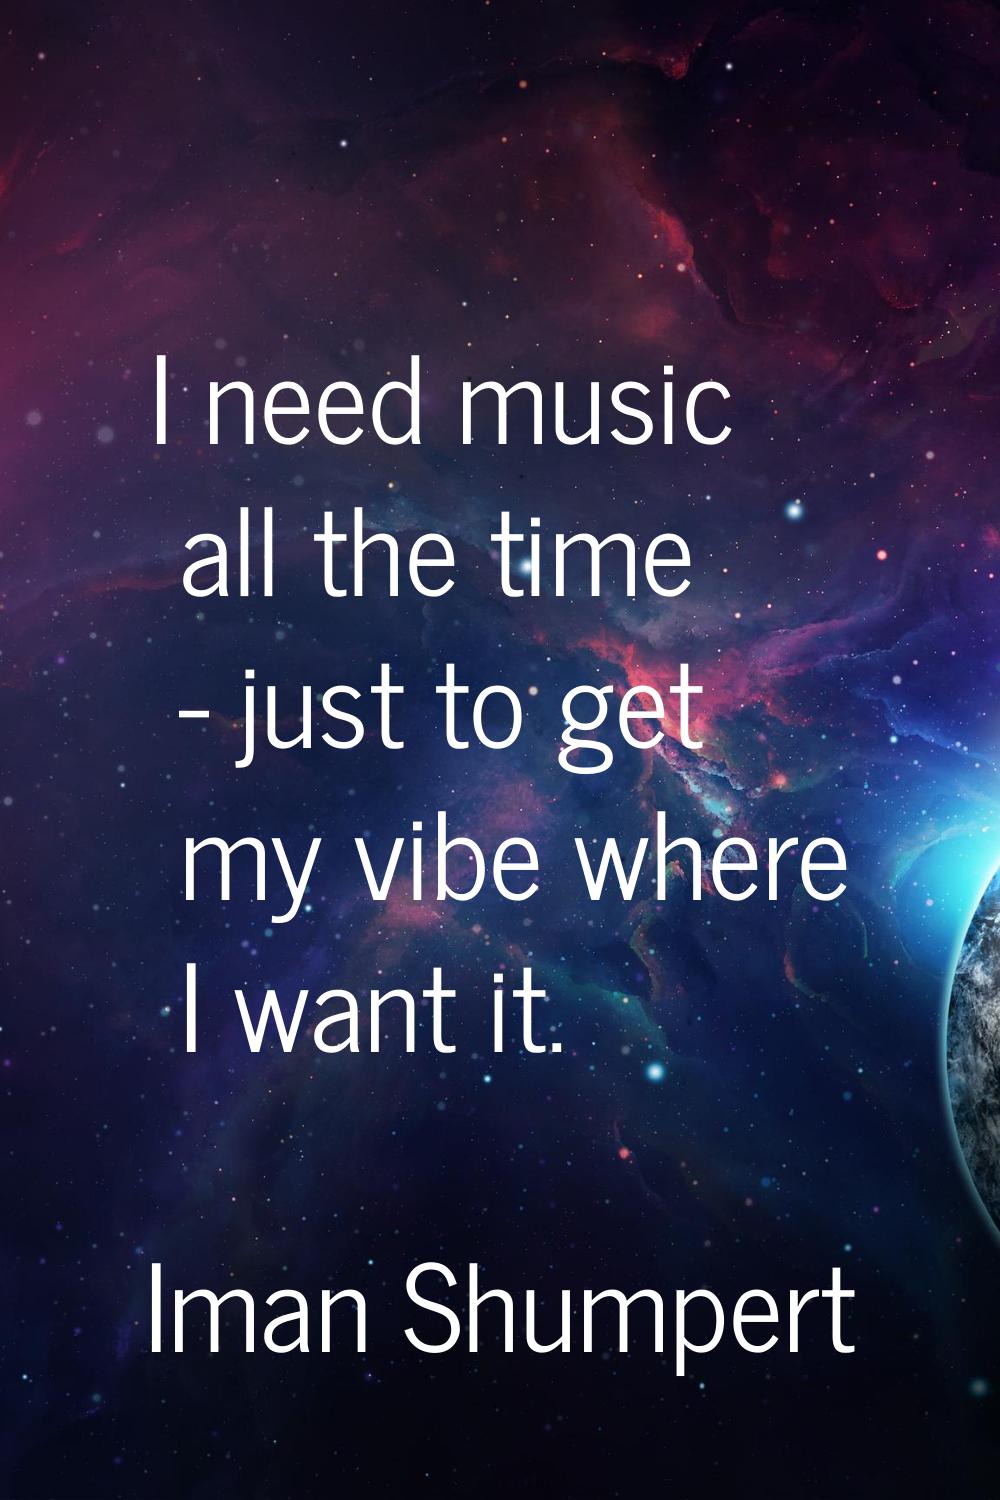 I need music all the time - just to get my vibe where I want it.